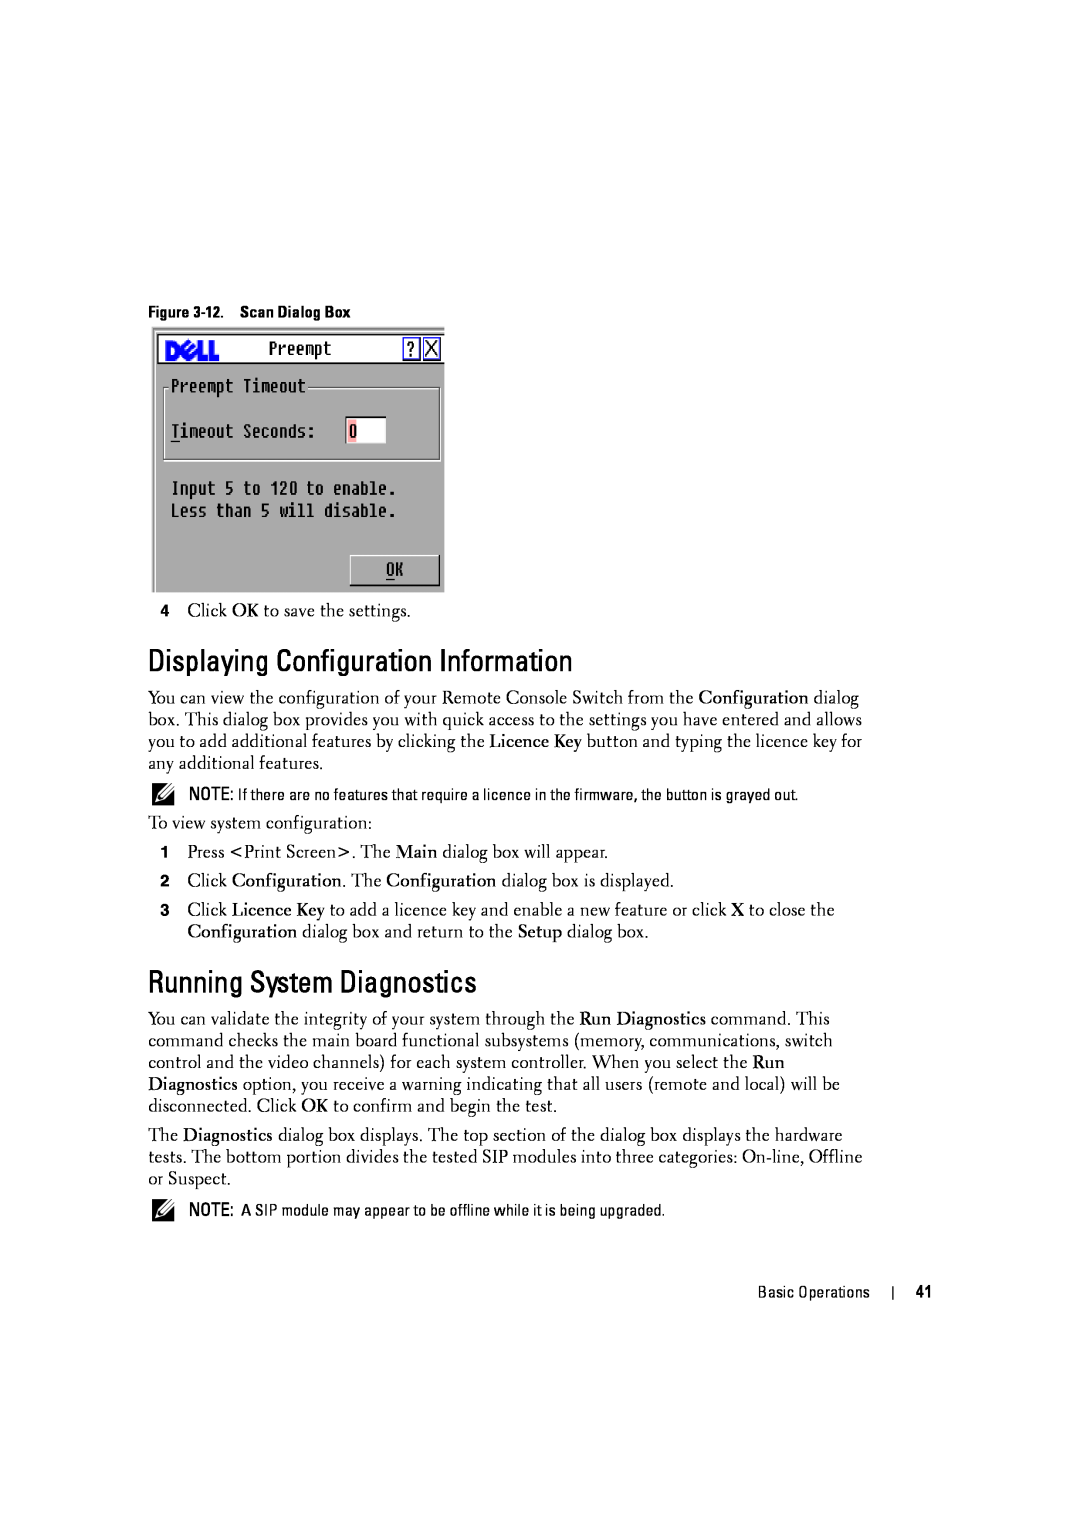 Dell 2161DS-2, 4161DS manual Displaying Configuration Information, Running System Diagnostics, 12. Scan Dialog Box 